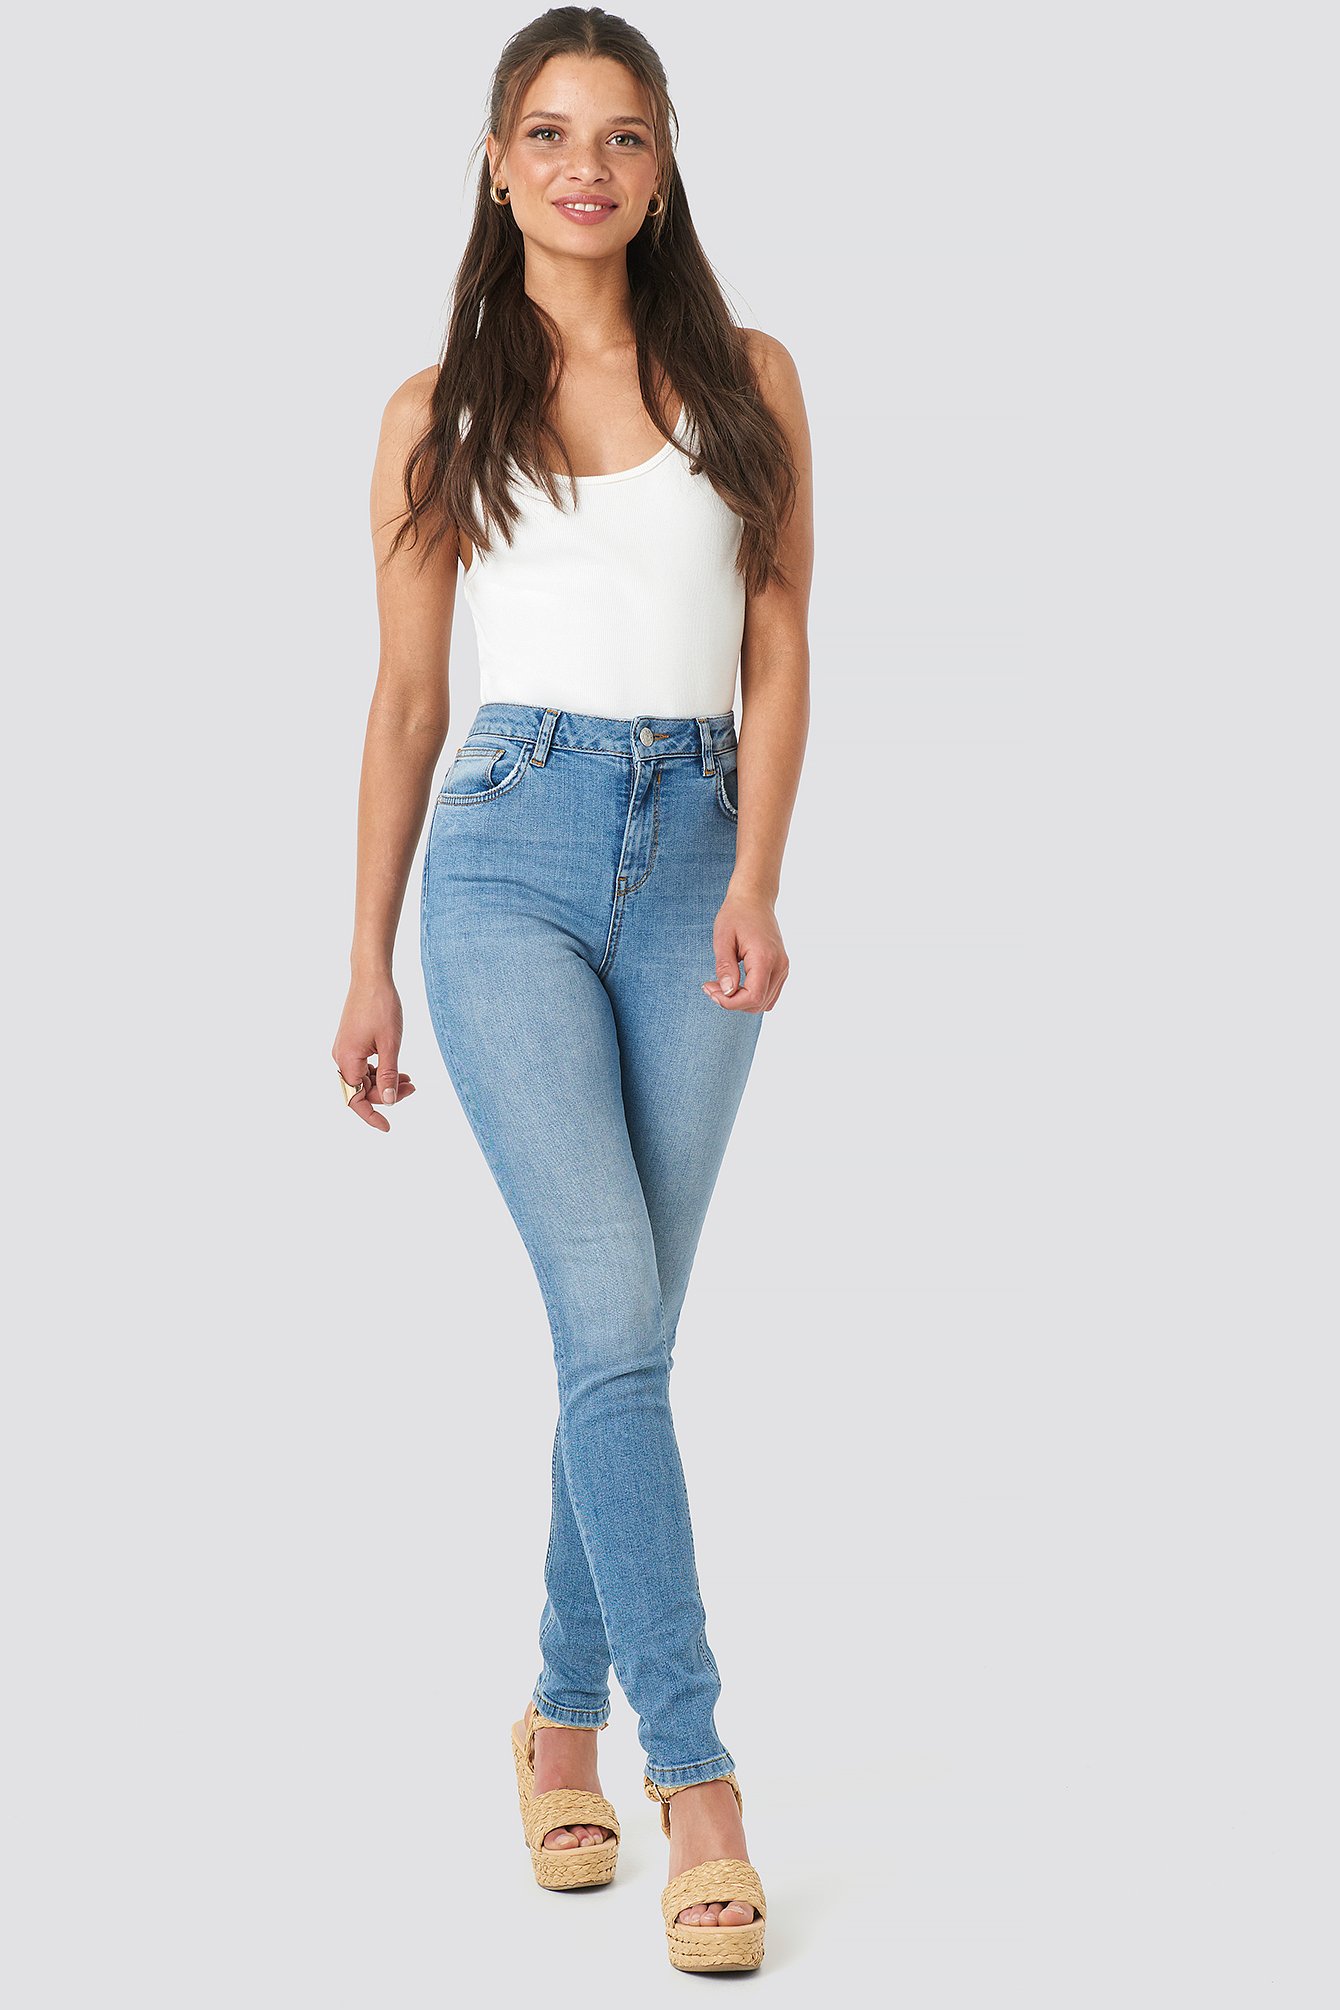 cheap high waisted skinny jeans